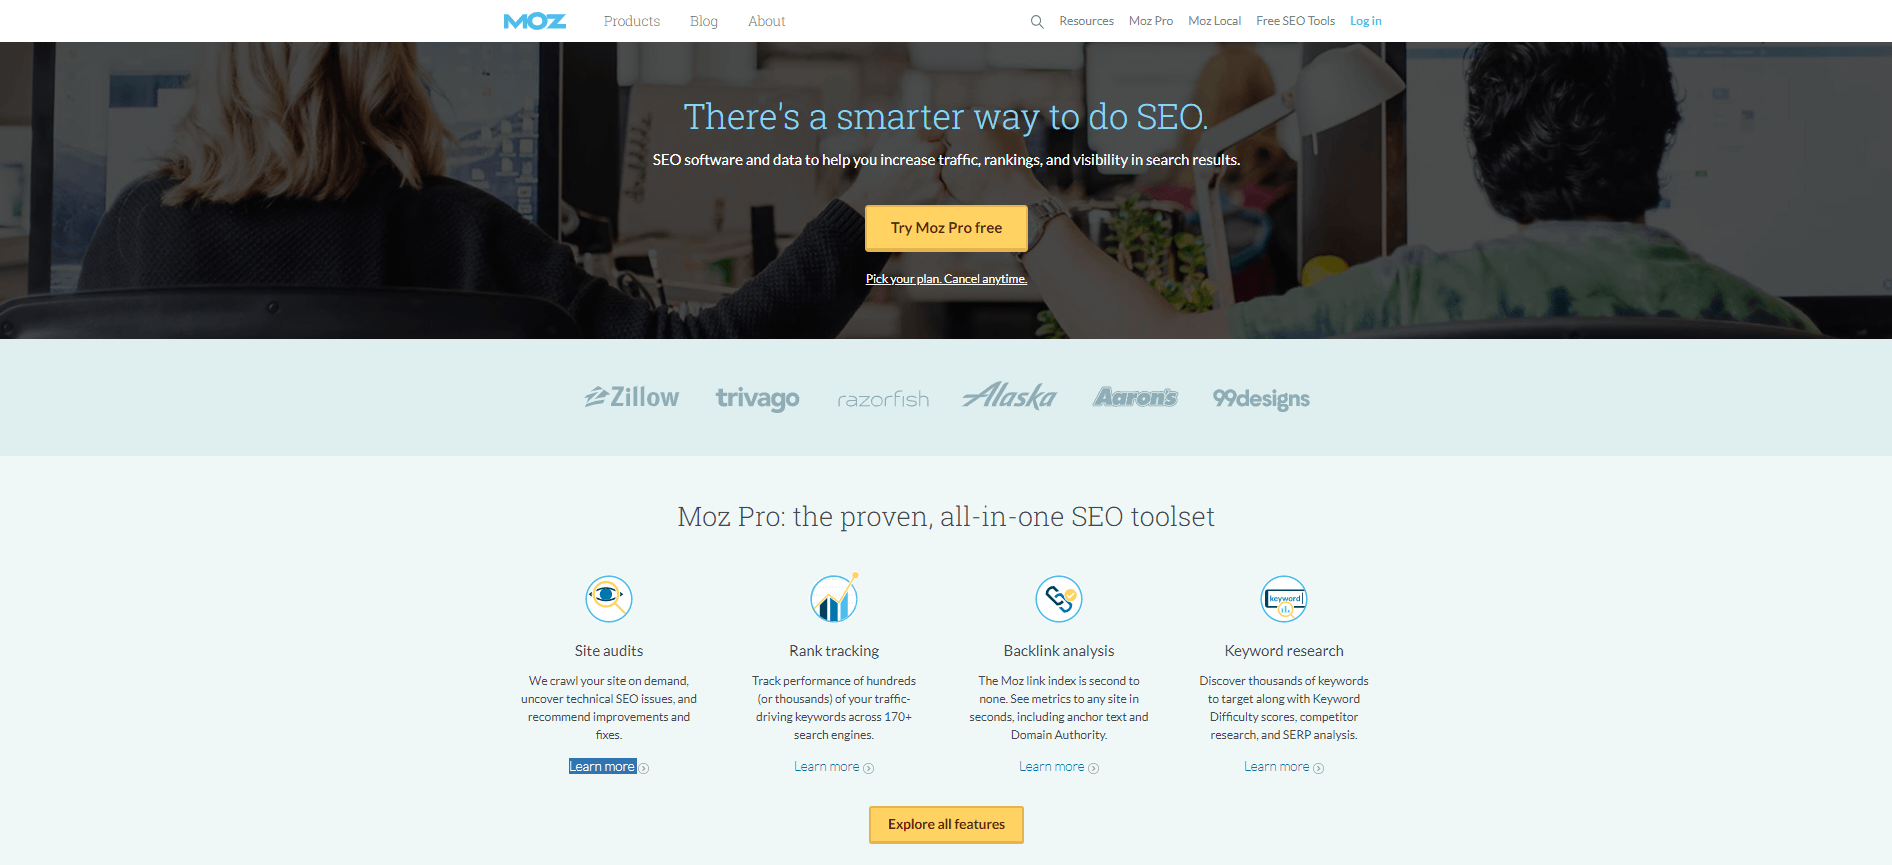 A screenshot of the MOZ services page.